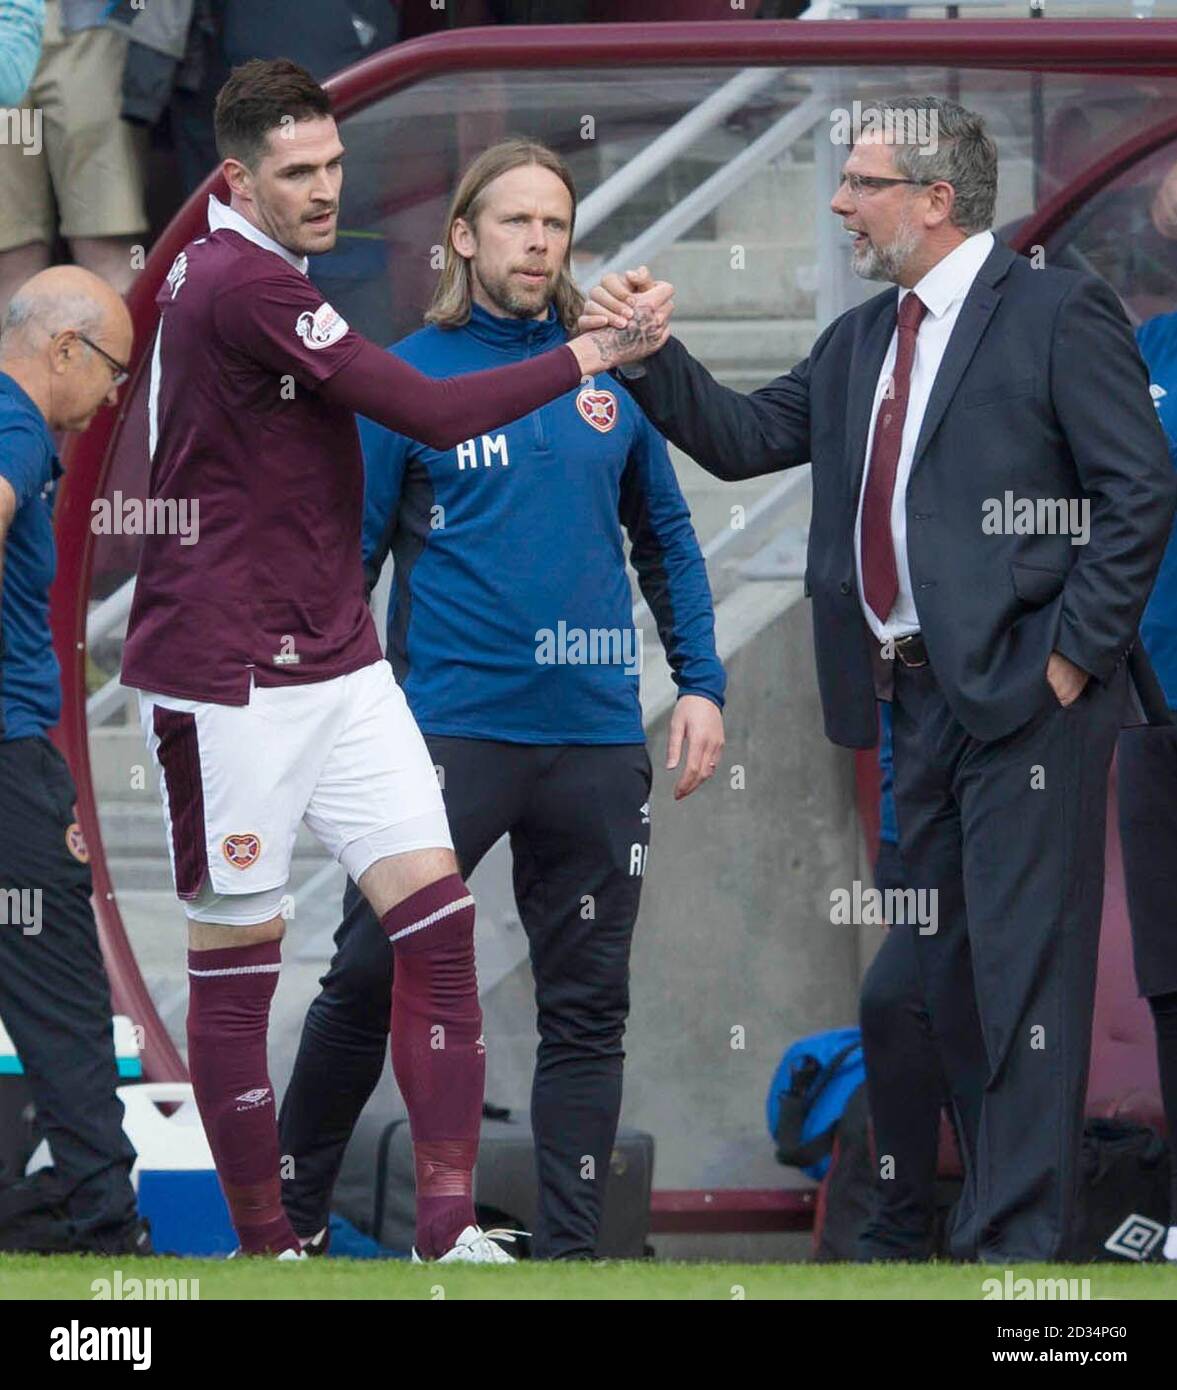 Hearts Kyle Lafferty celebrates scoring his side's first goal of the game with manager Craig Levein during the Ladbrokes Scottish Premiership match at Tynecastle Stadium, Edinburgh. Stock Photo